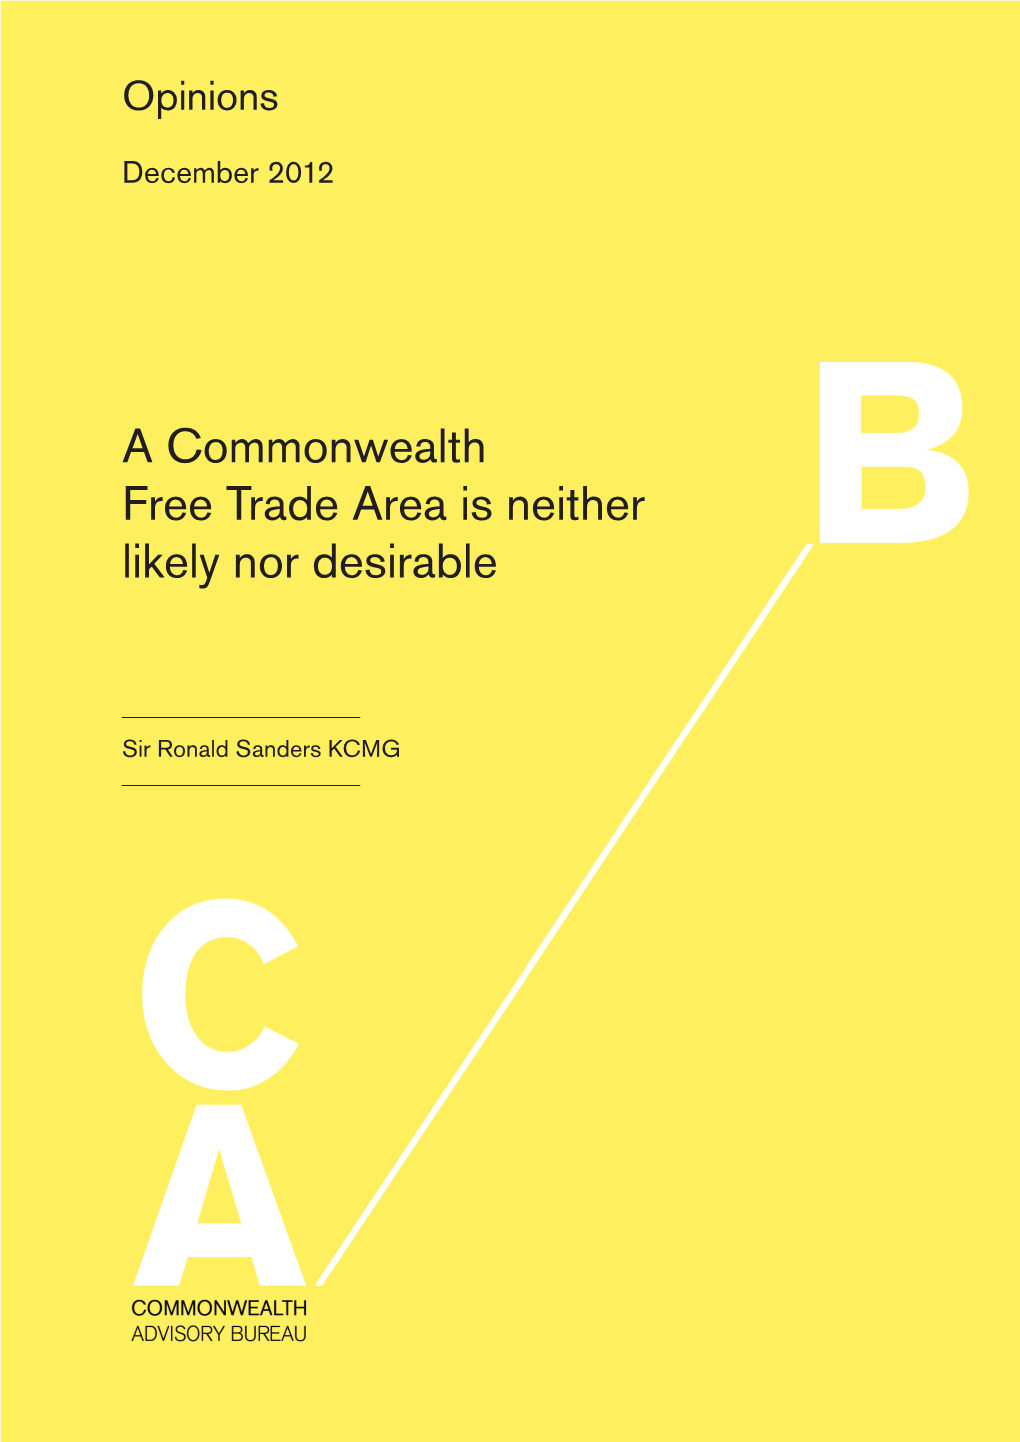 A Commonwealth Free Trade Area Is Neither Likely Nor Desirable